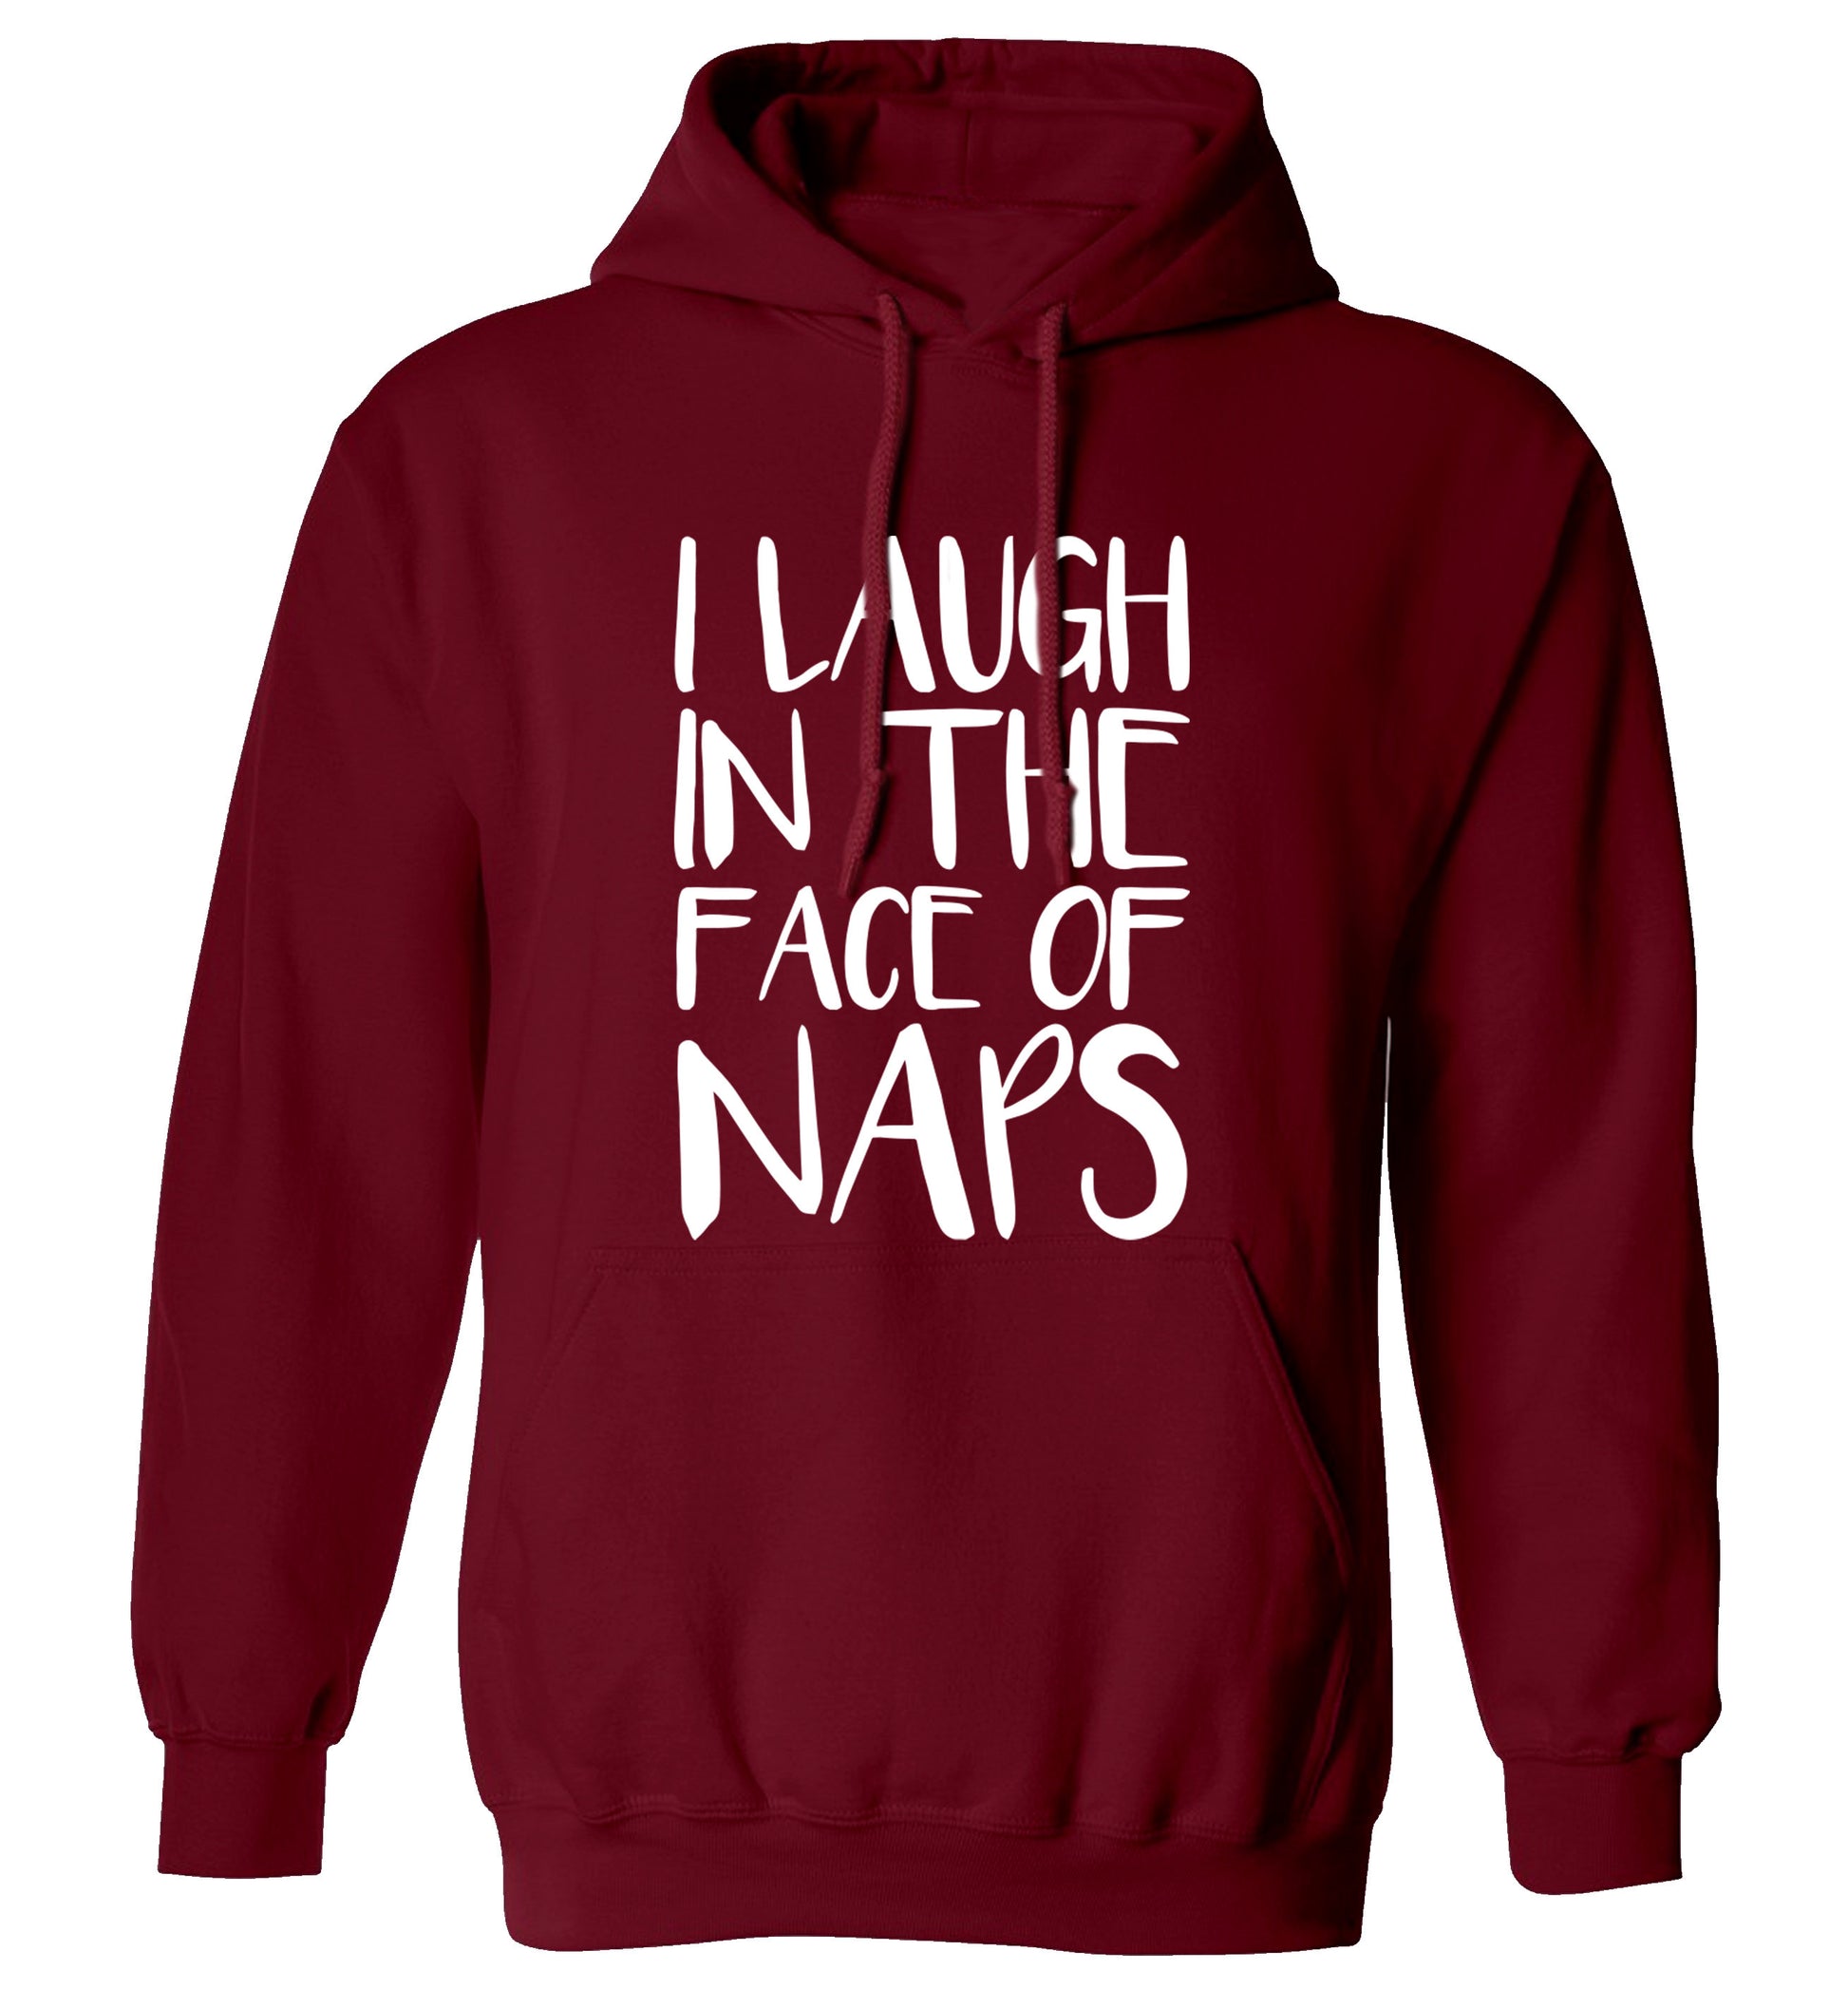 I laugh in the face of naps adults unisex maroon hoodie 2XL